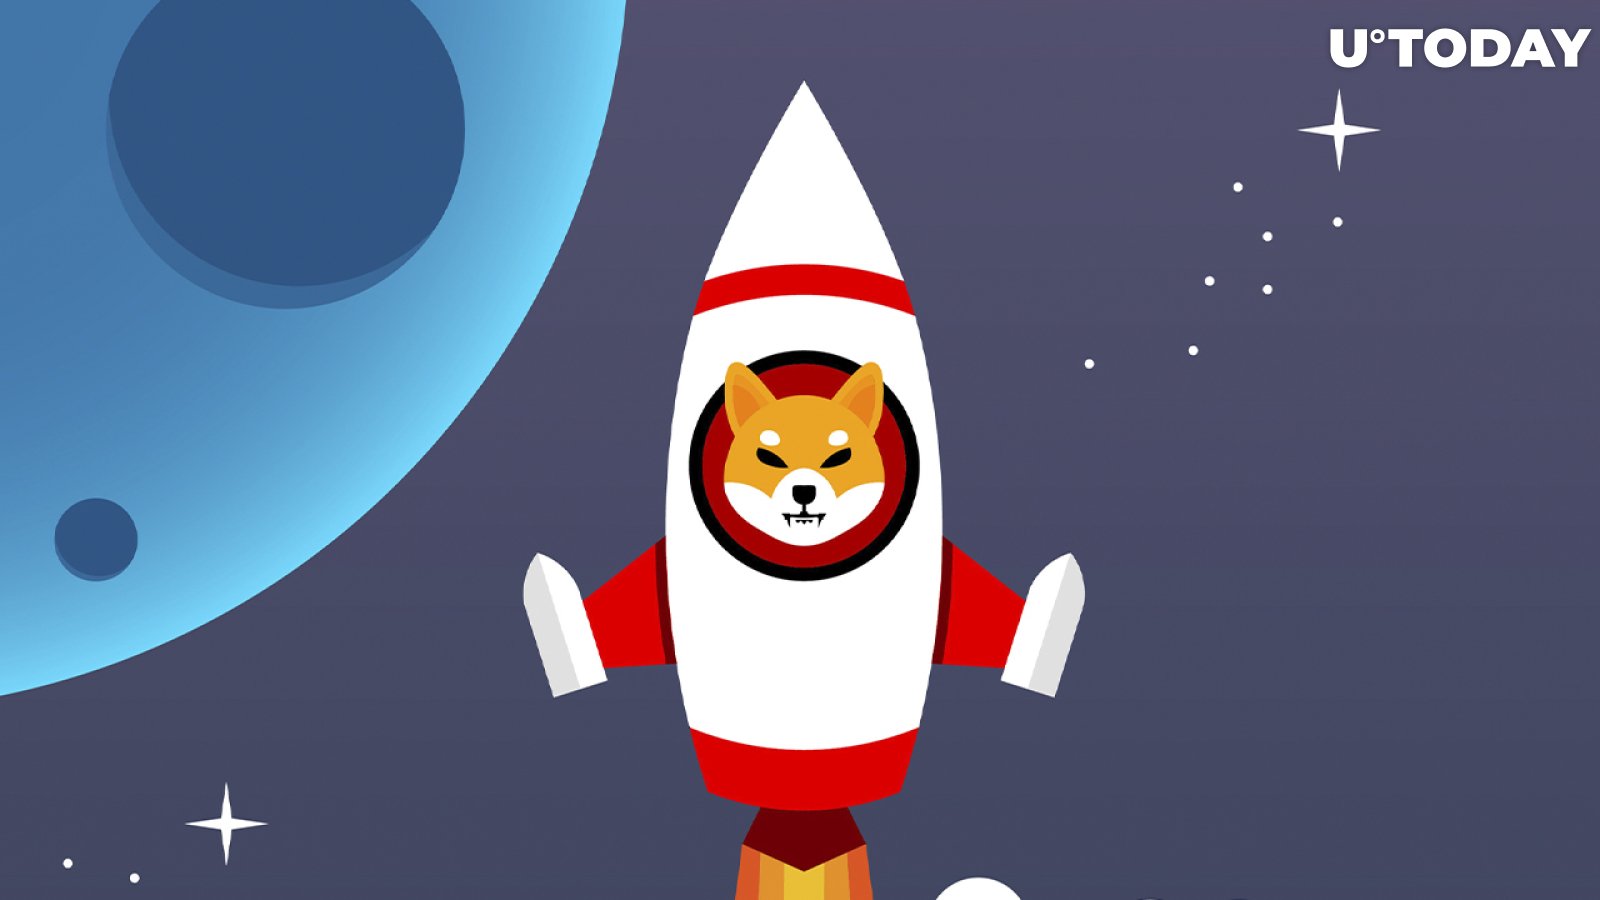 Here's How SHIB Price May Reach $0.01, Head of Shiba Inu Burning Business Says